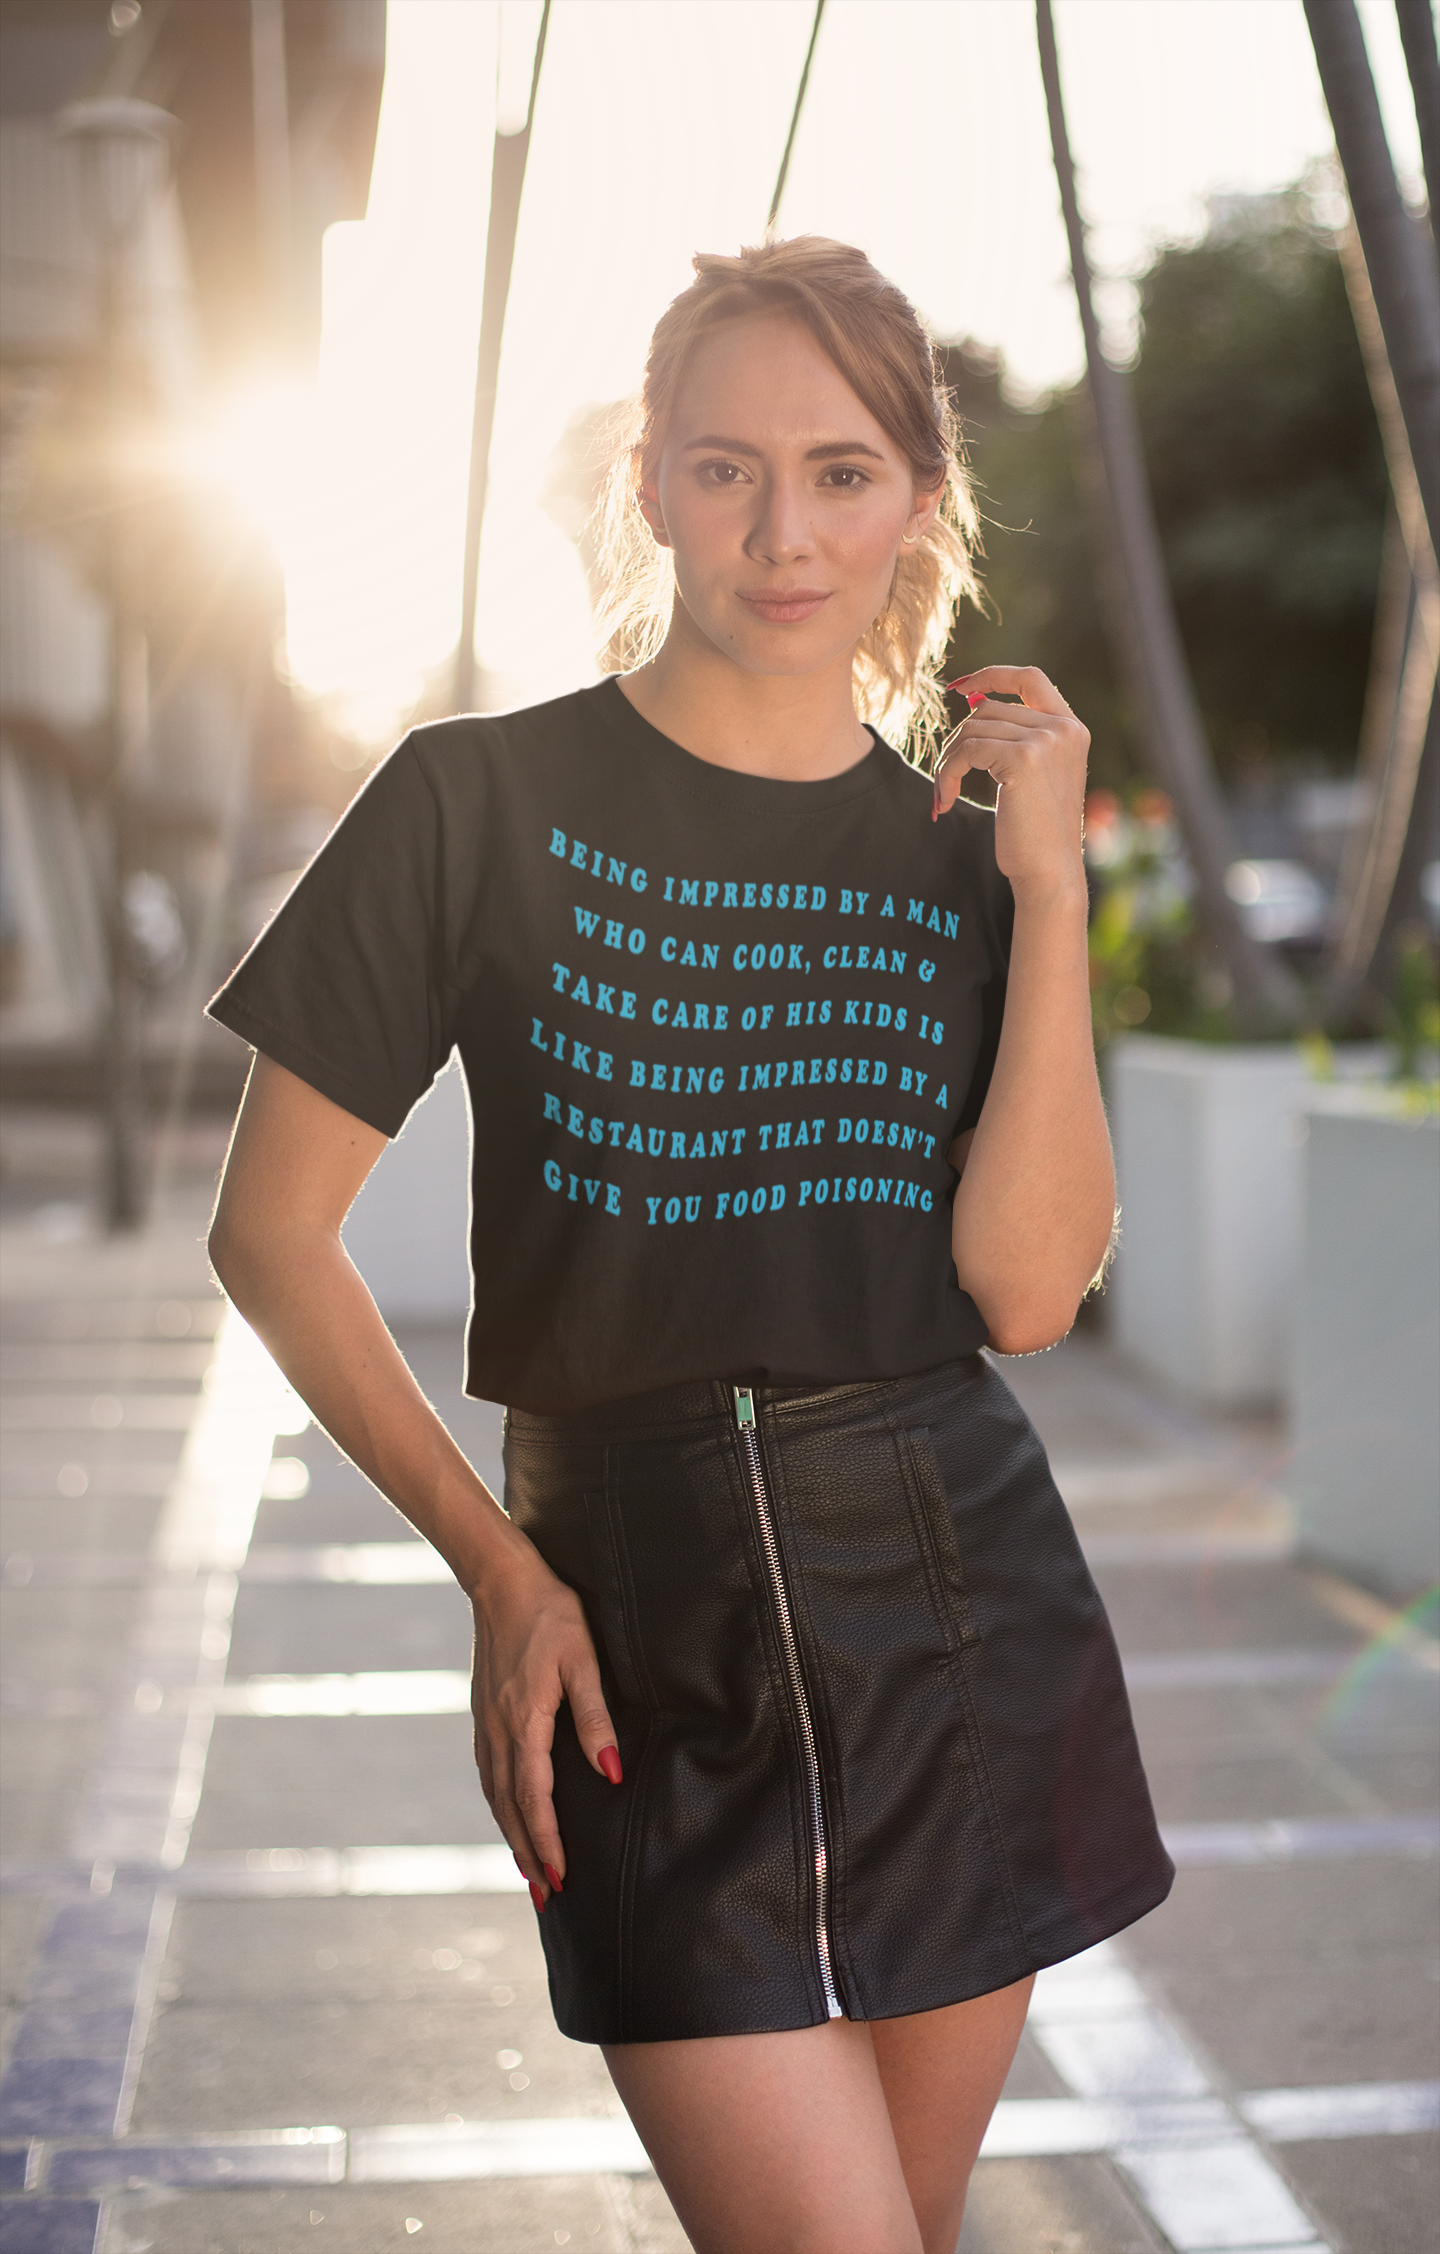 Being Impressed By A Man…Unisex Feminist t-shirt - Shop Women’s Rights T-Shirts - Feminist Trash Store - L - Black oversized women’s t-shirt 